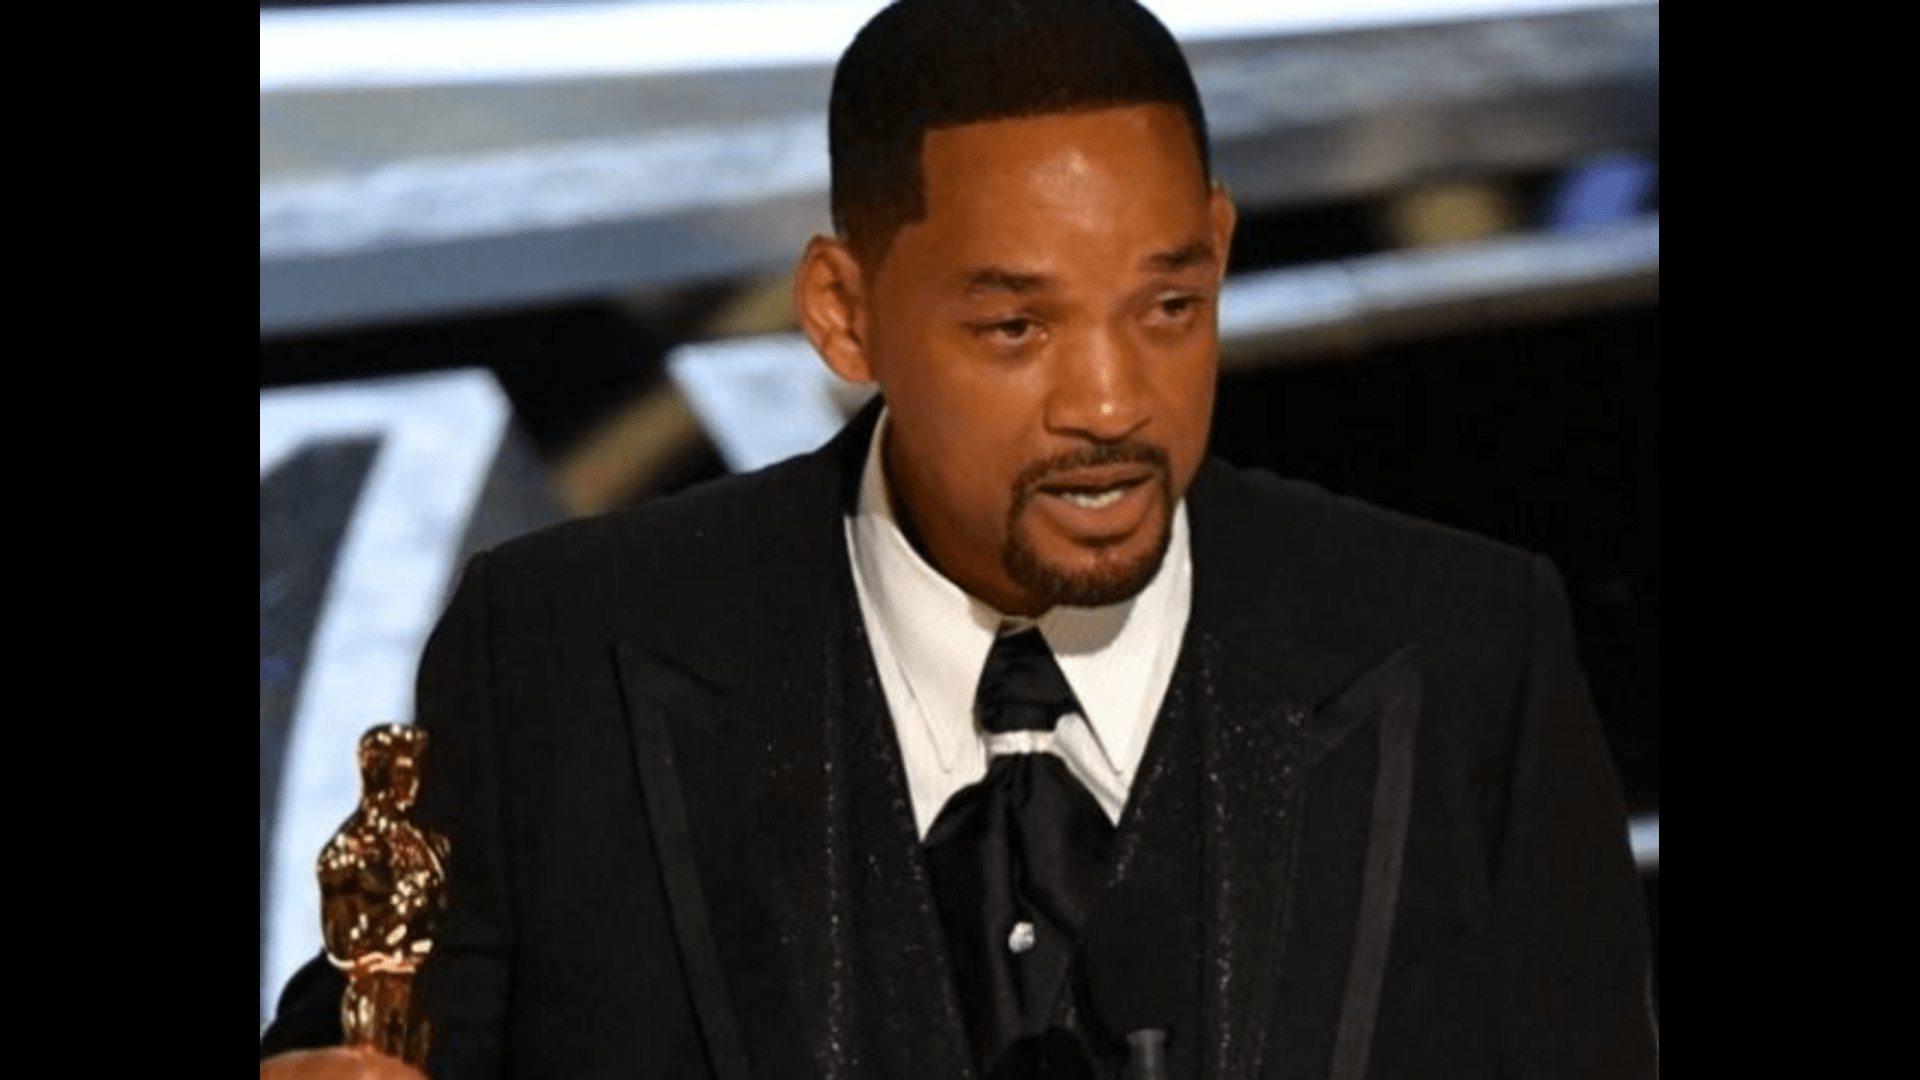 Will Smith resigns from the Academy after punching Chris Rock at the Oscars